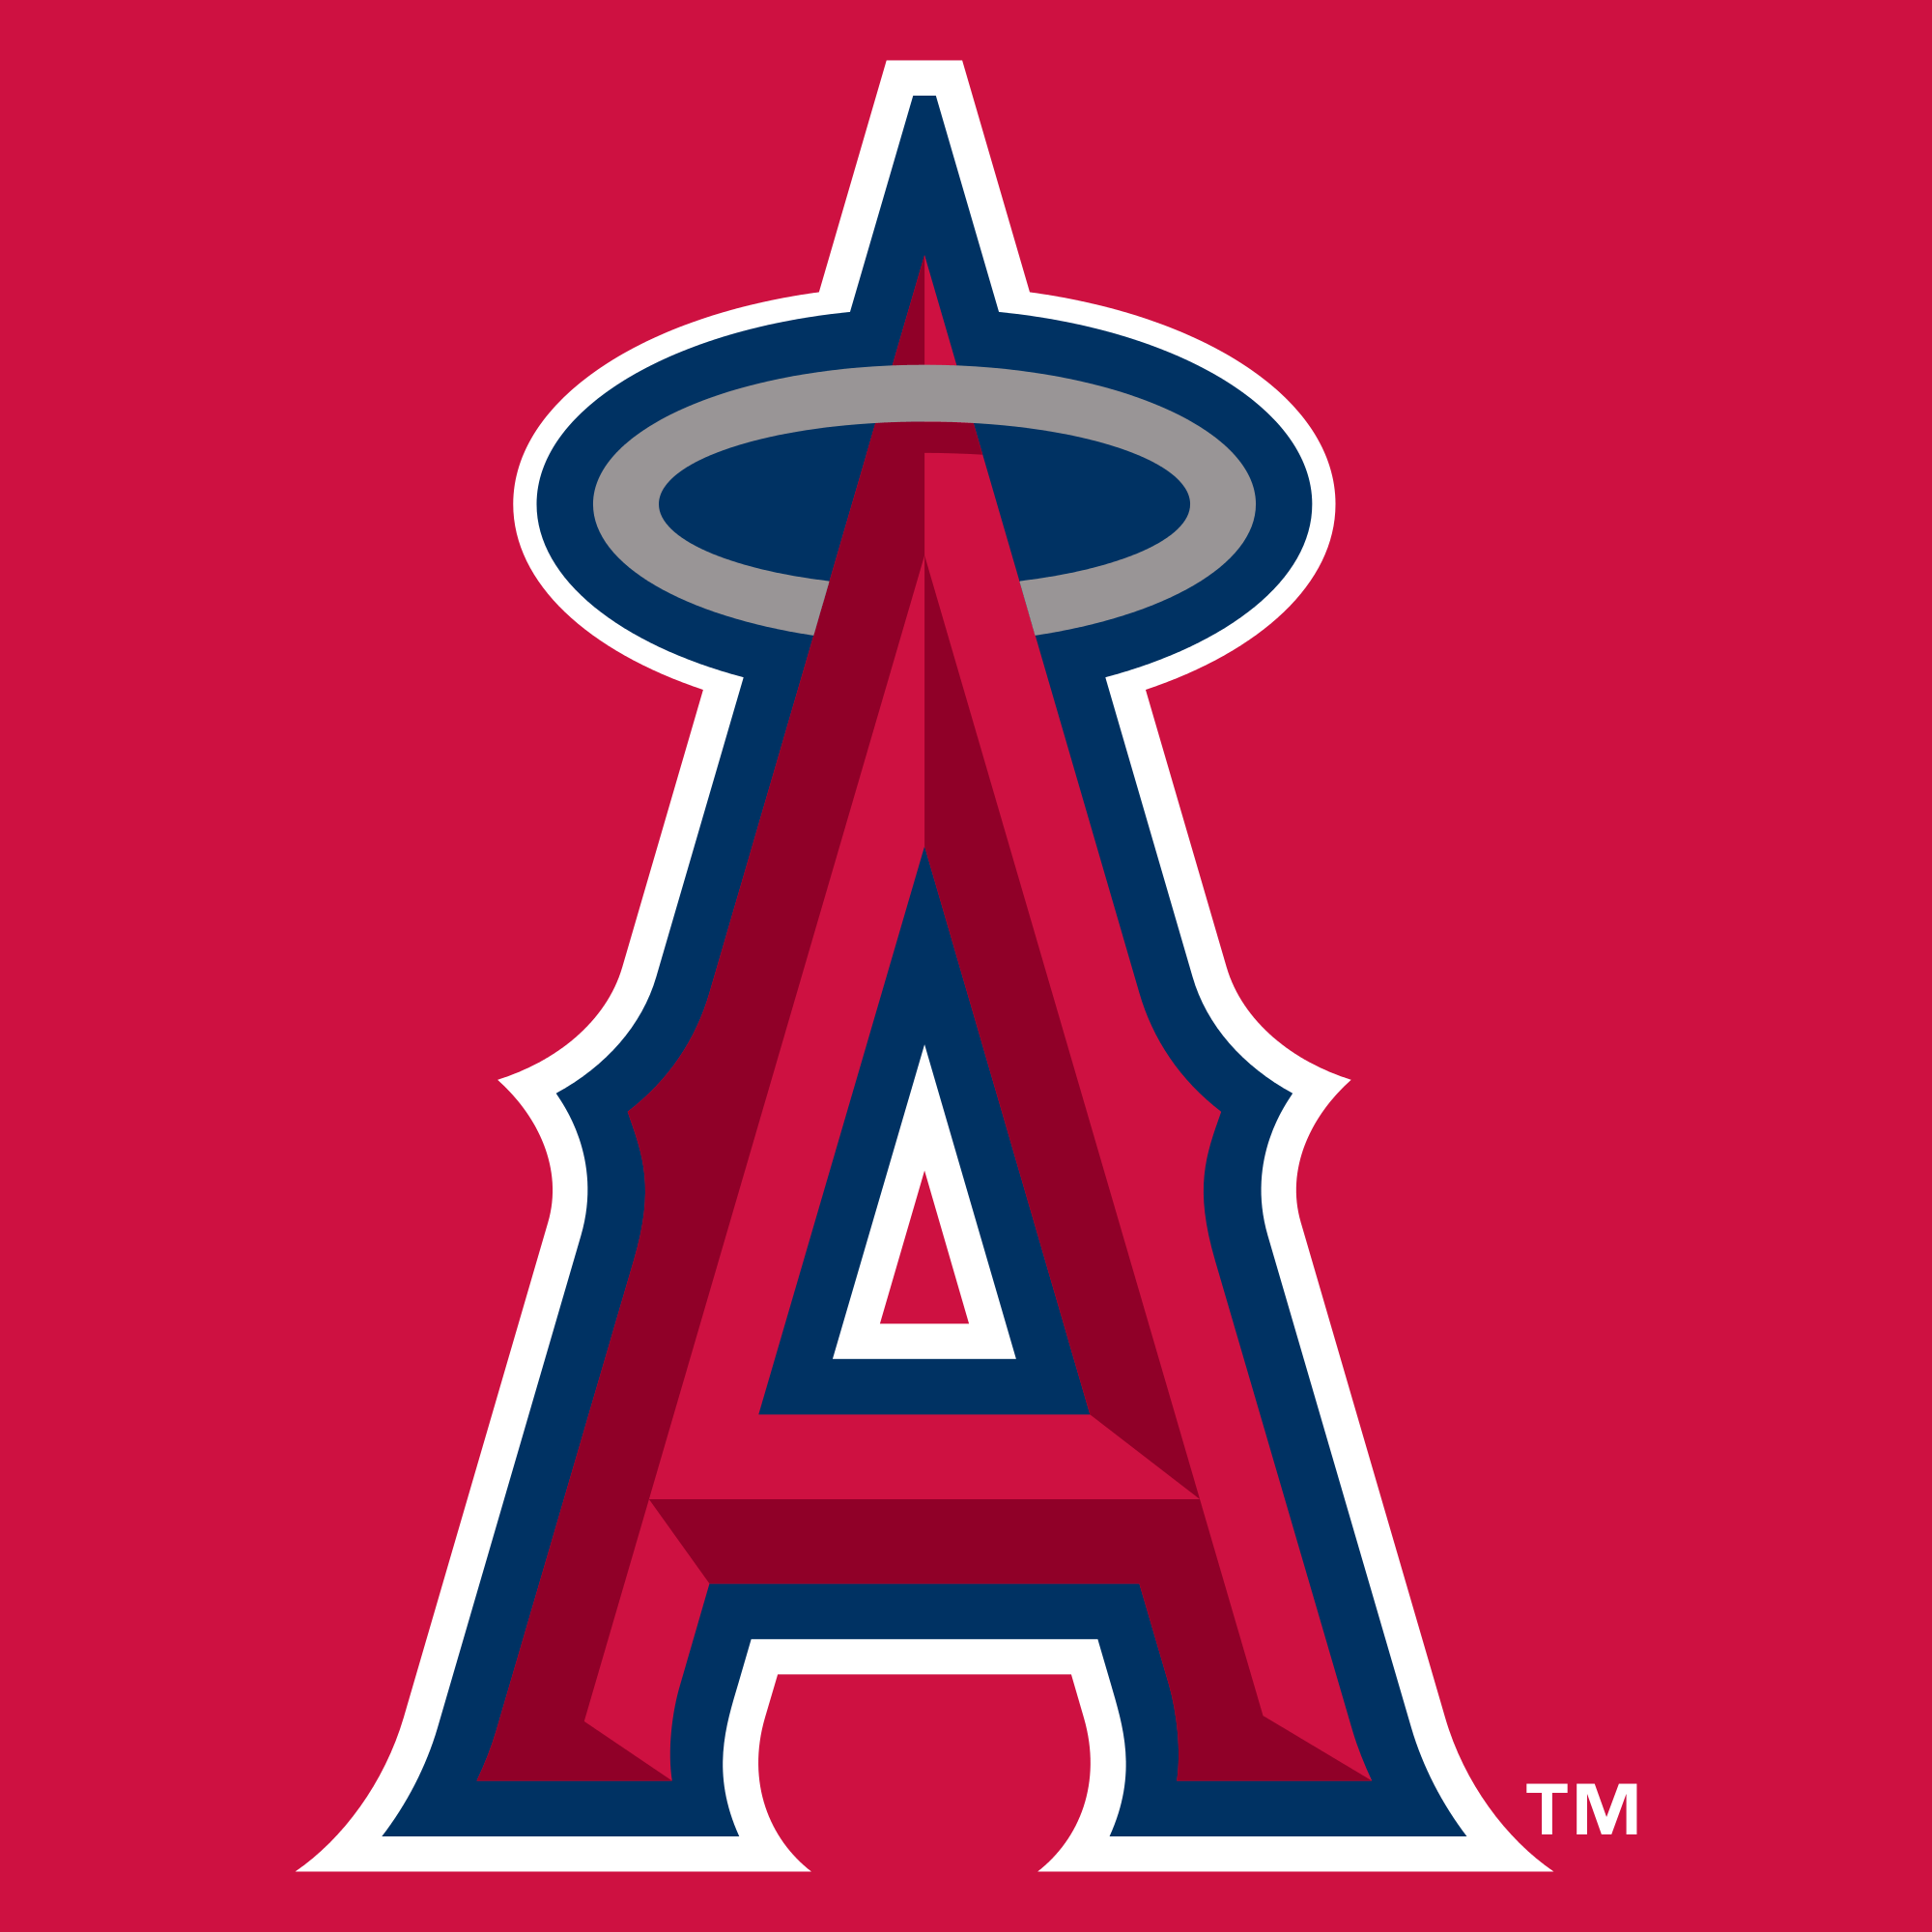 Los Angeles Angels Logo - File:Los Angeles Angels of Anaheim Insignia.svg - Wikimedia Commons